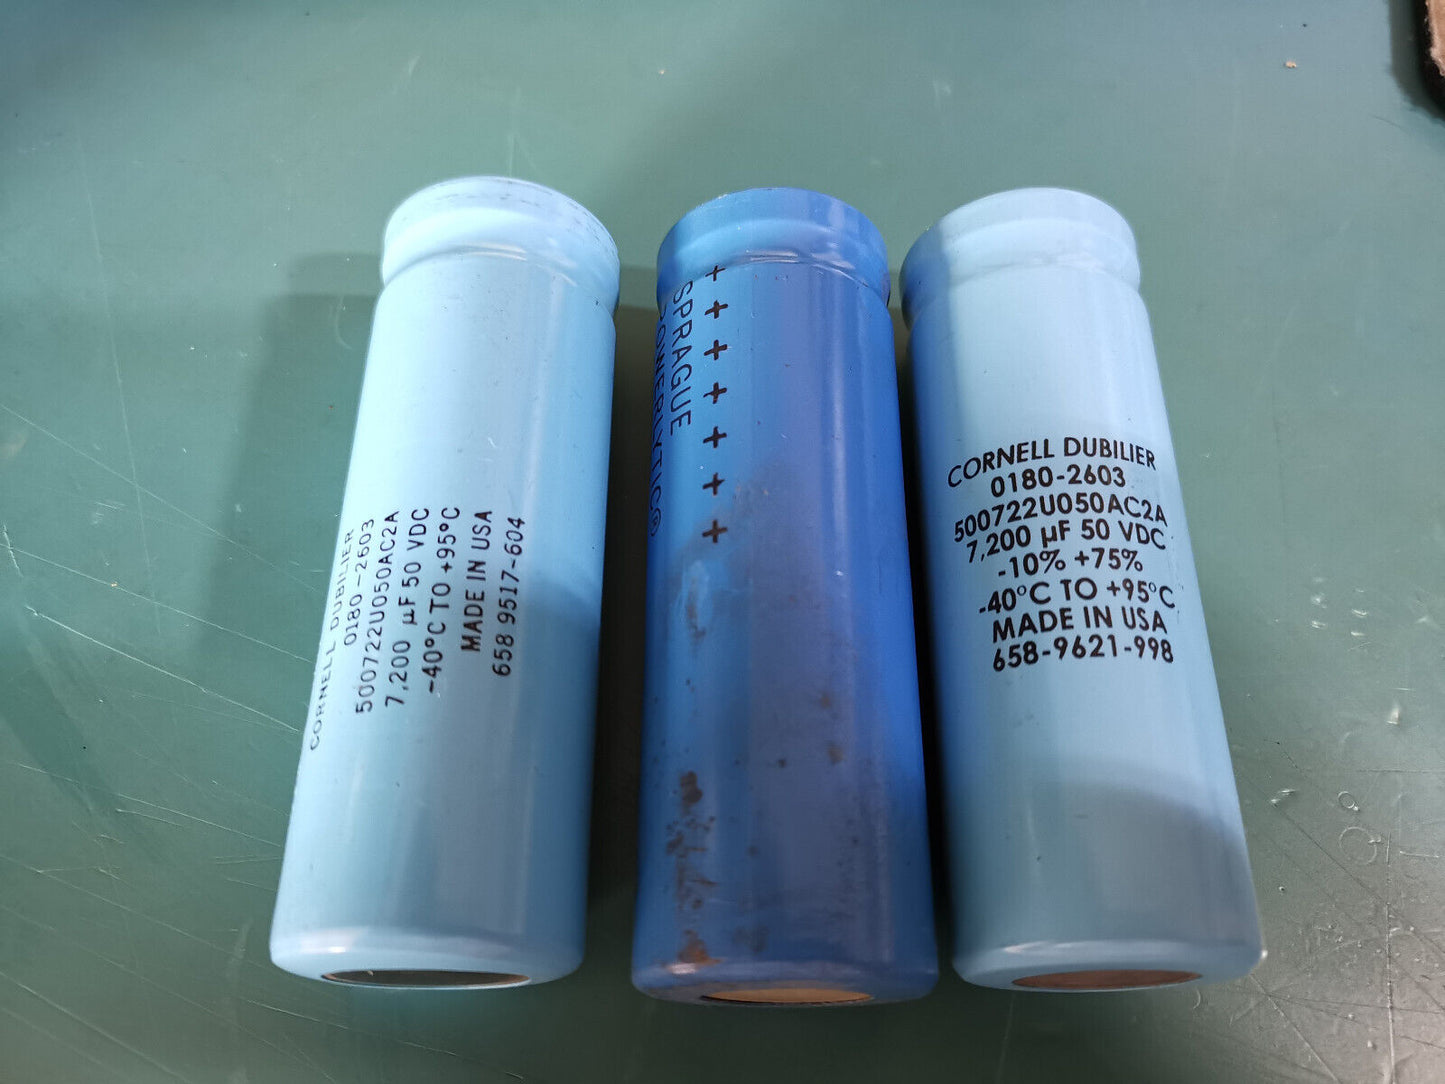 HP Agilent Vintage Test Gear Power Supply Capacitor